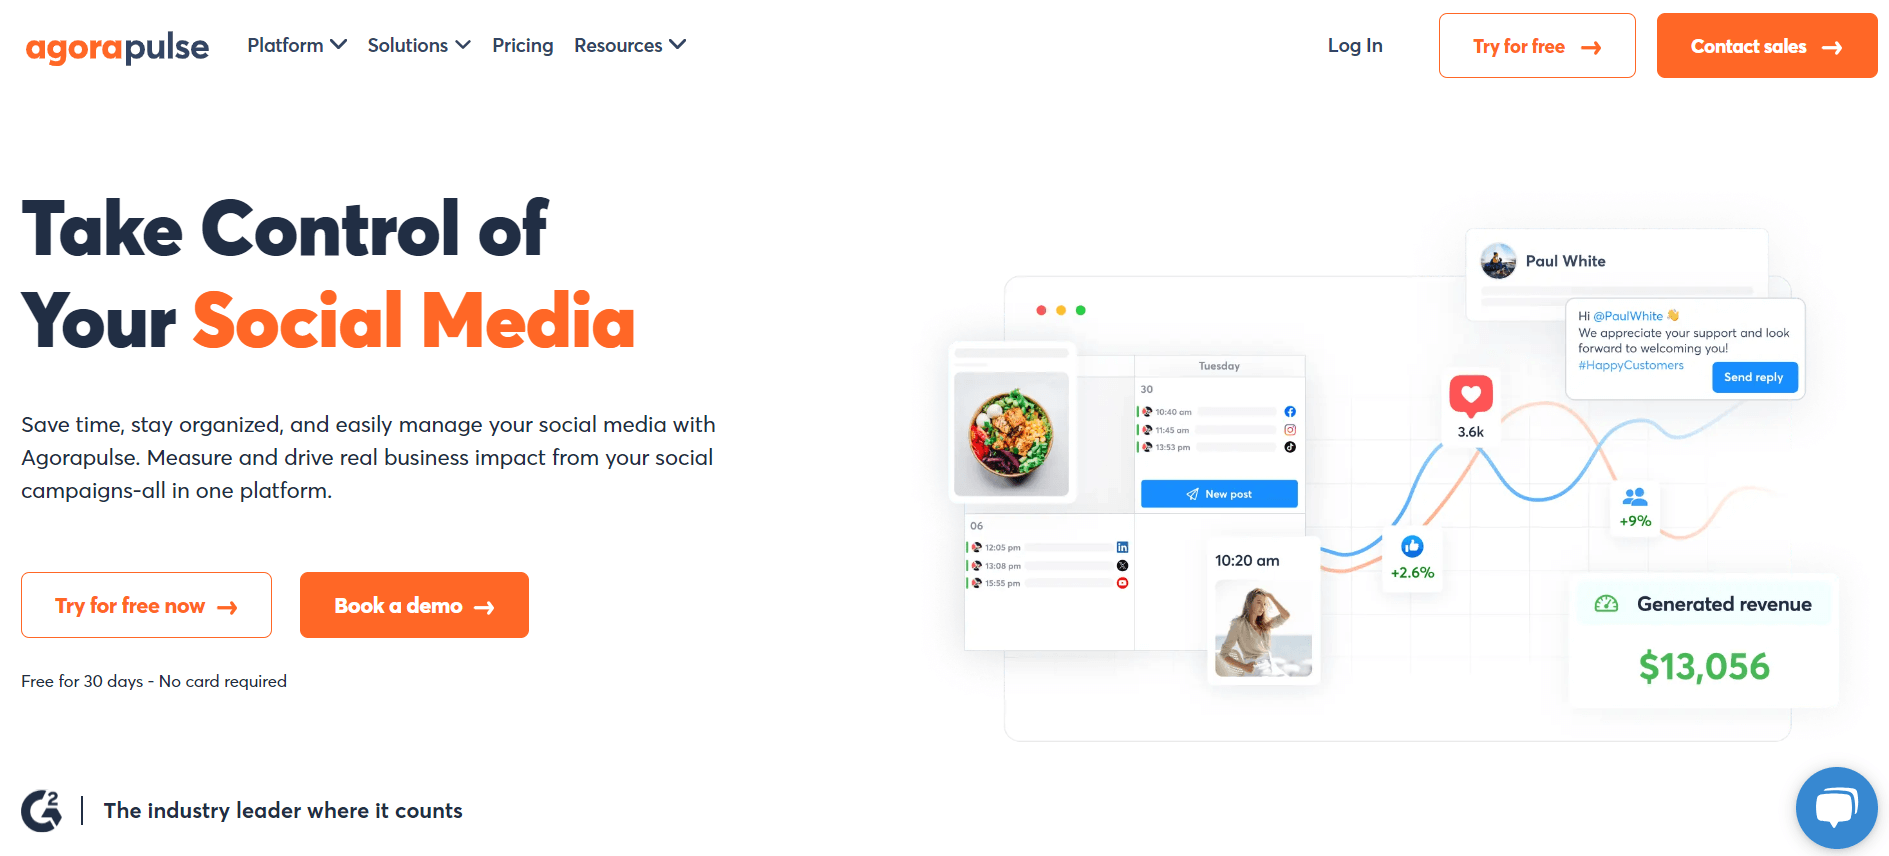 Homepage of Agorapulse promoting their social media management platform with features like scheduling, collaboration, and analytics, highlighting the ease of controlling social media campaigns from one spot.